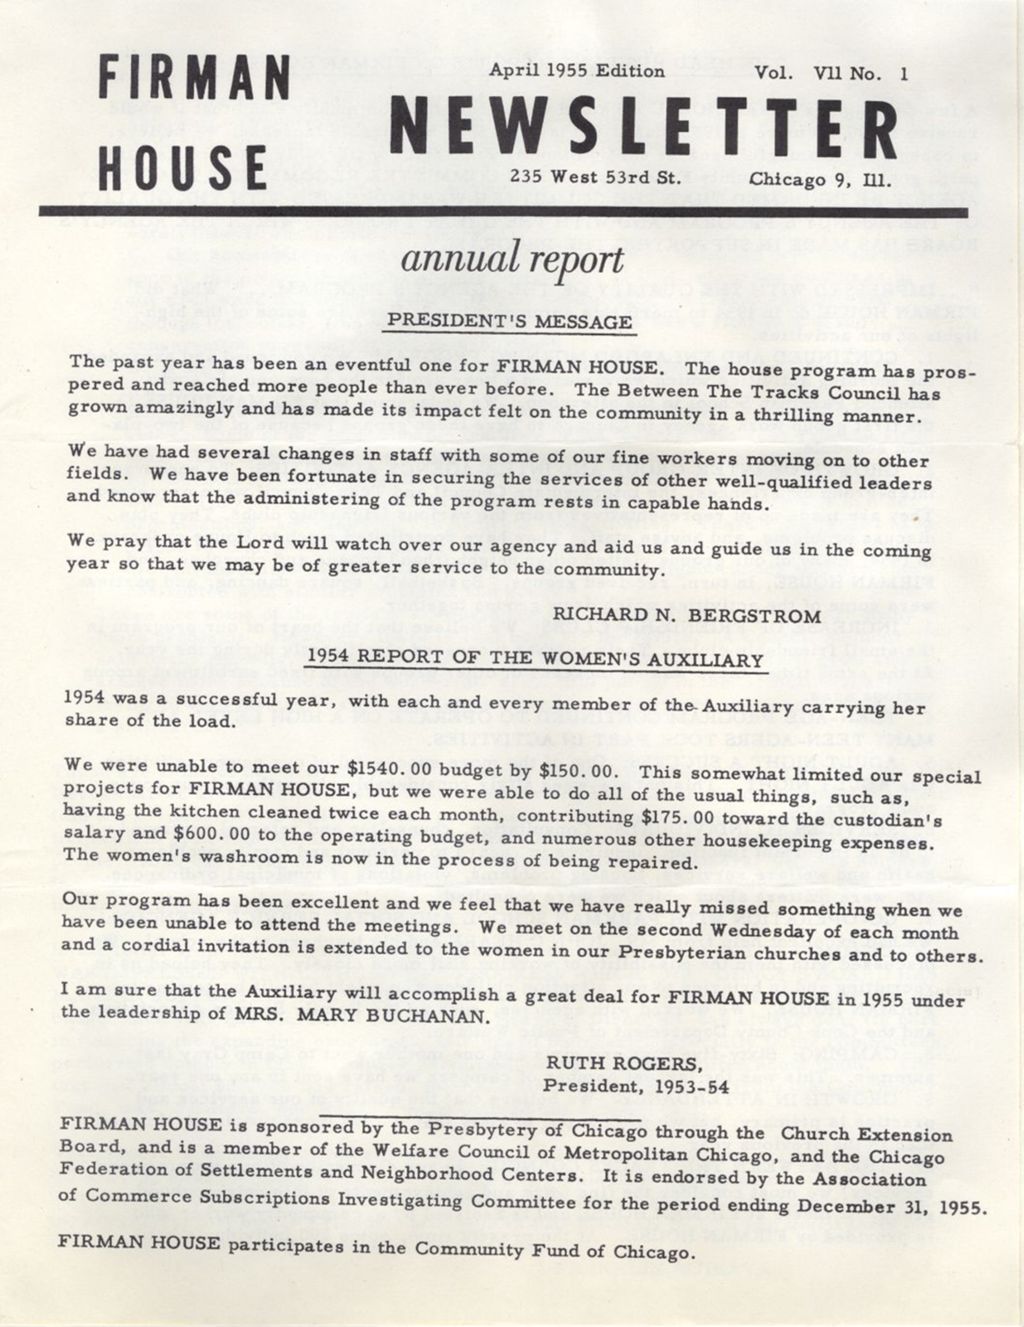 Miniature of Firman House newsletter: annual report edition